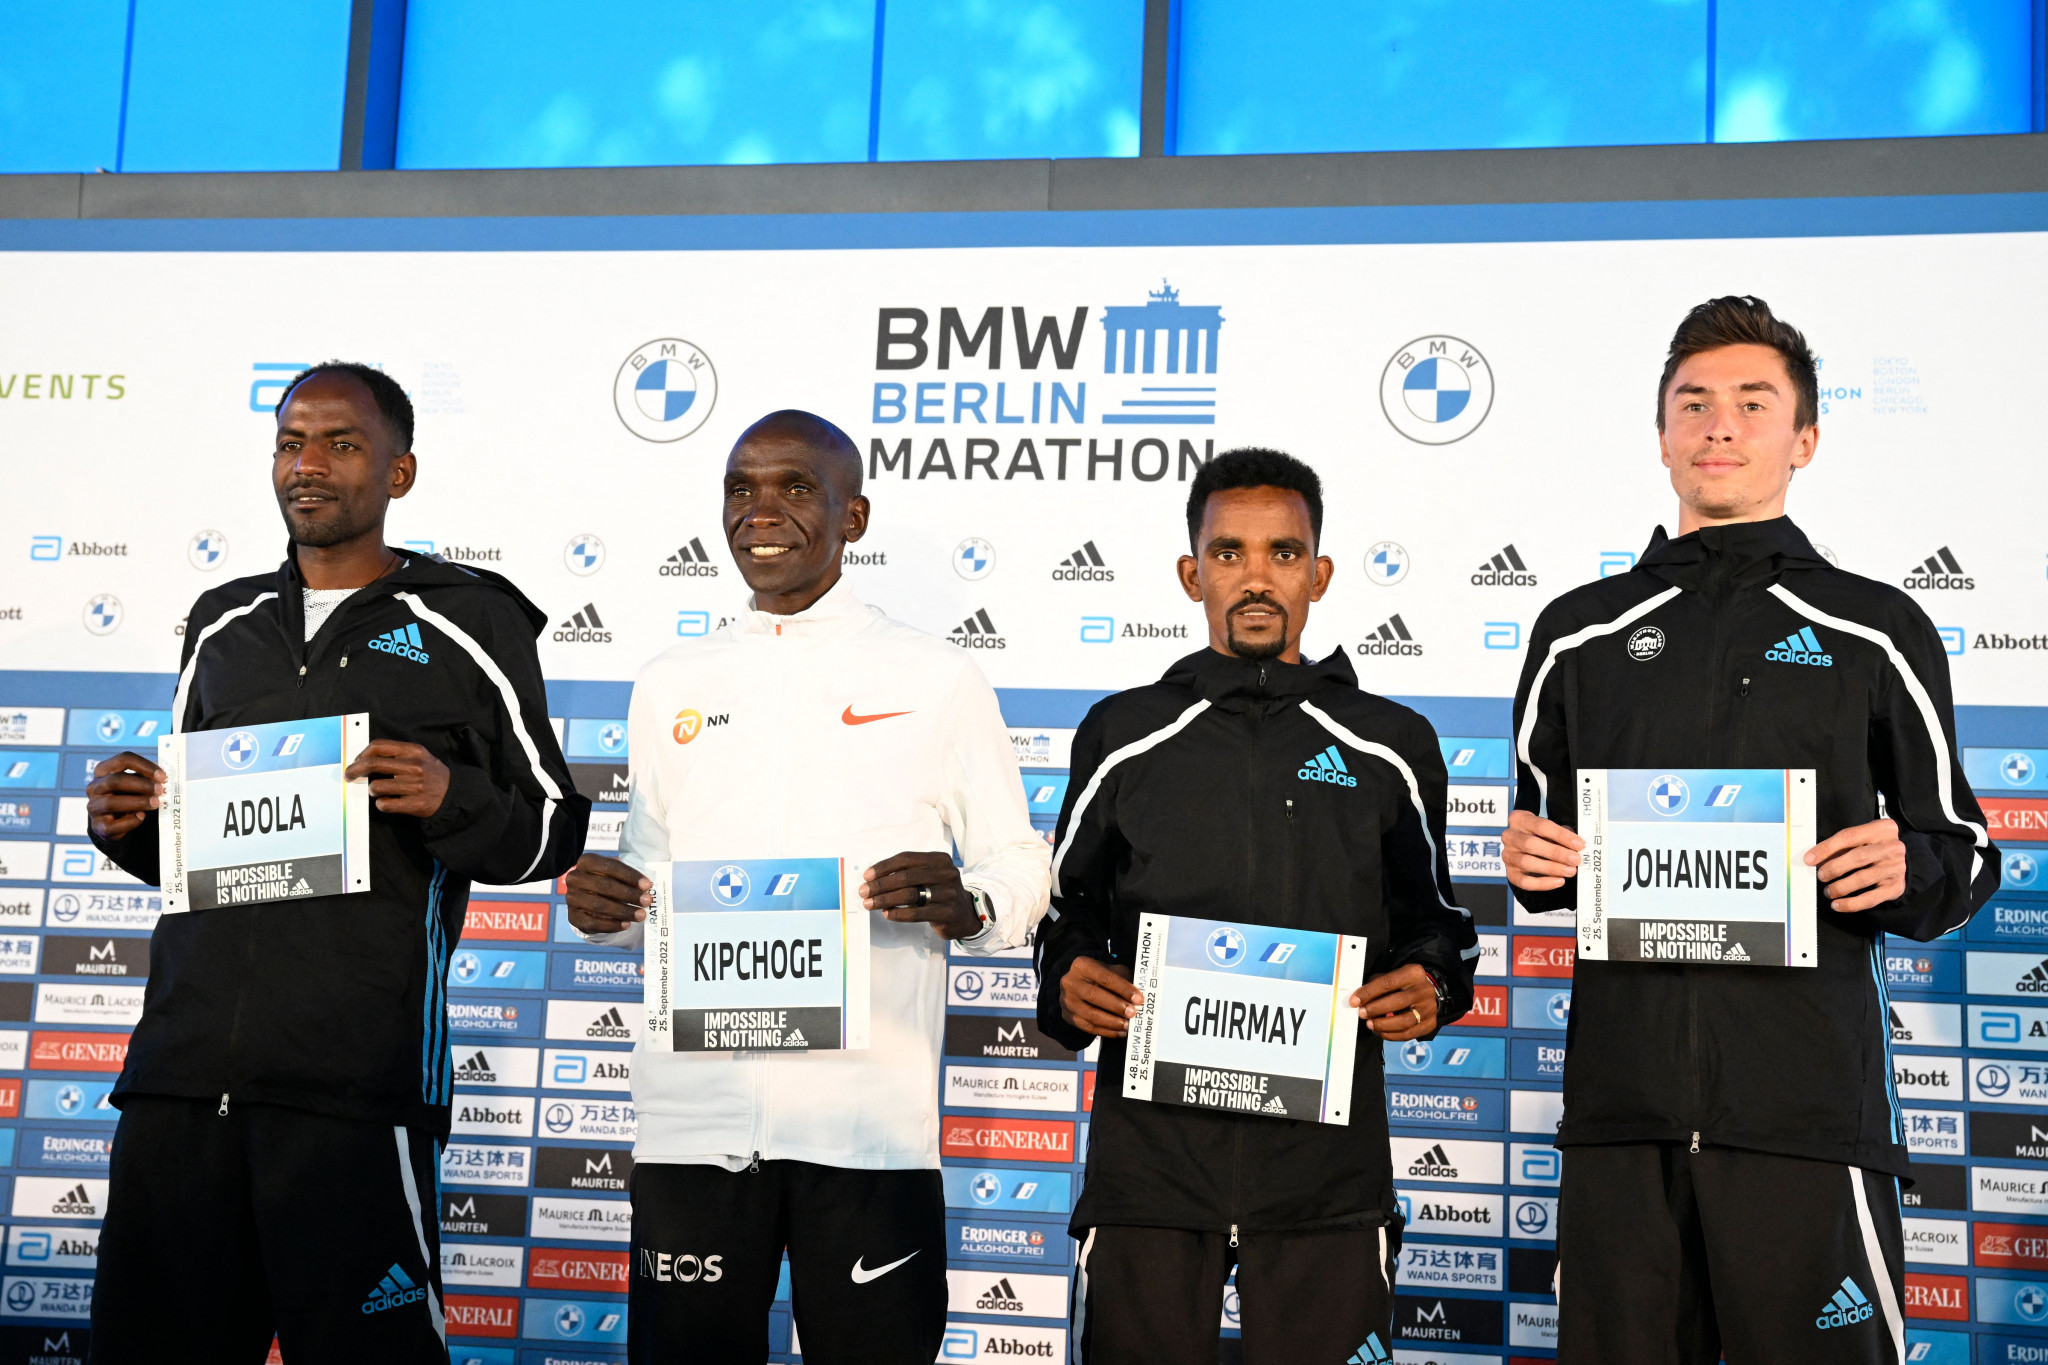 Kipchoge plays it cool before sixth Berlin Marathon and tilt at lowering world record